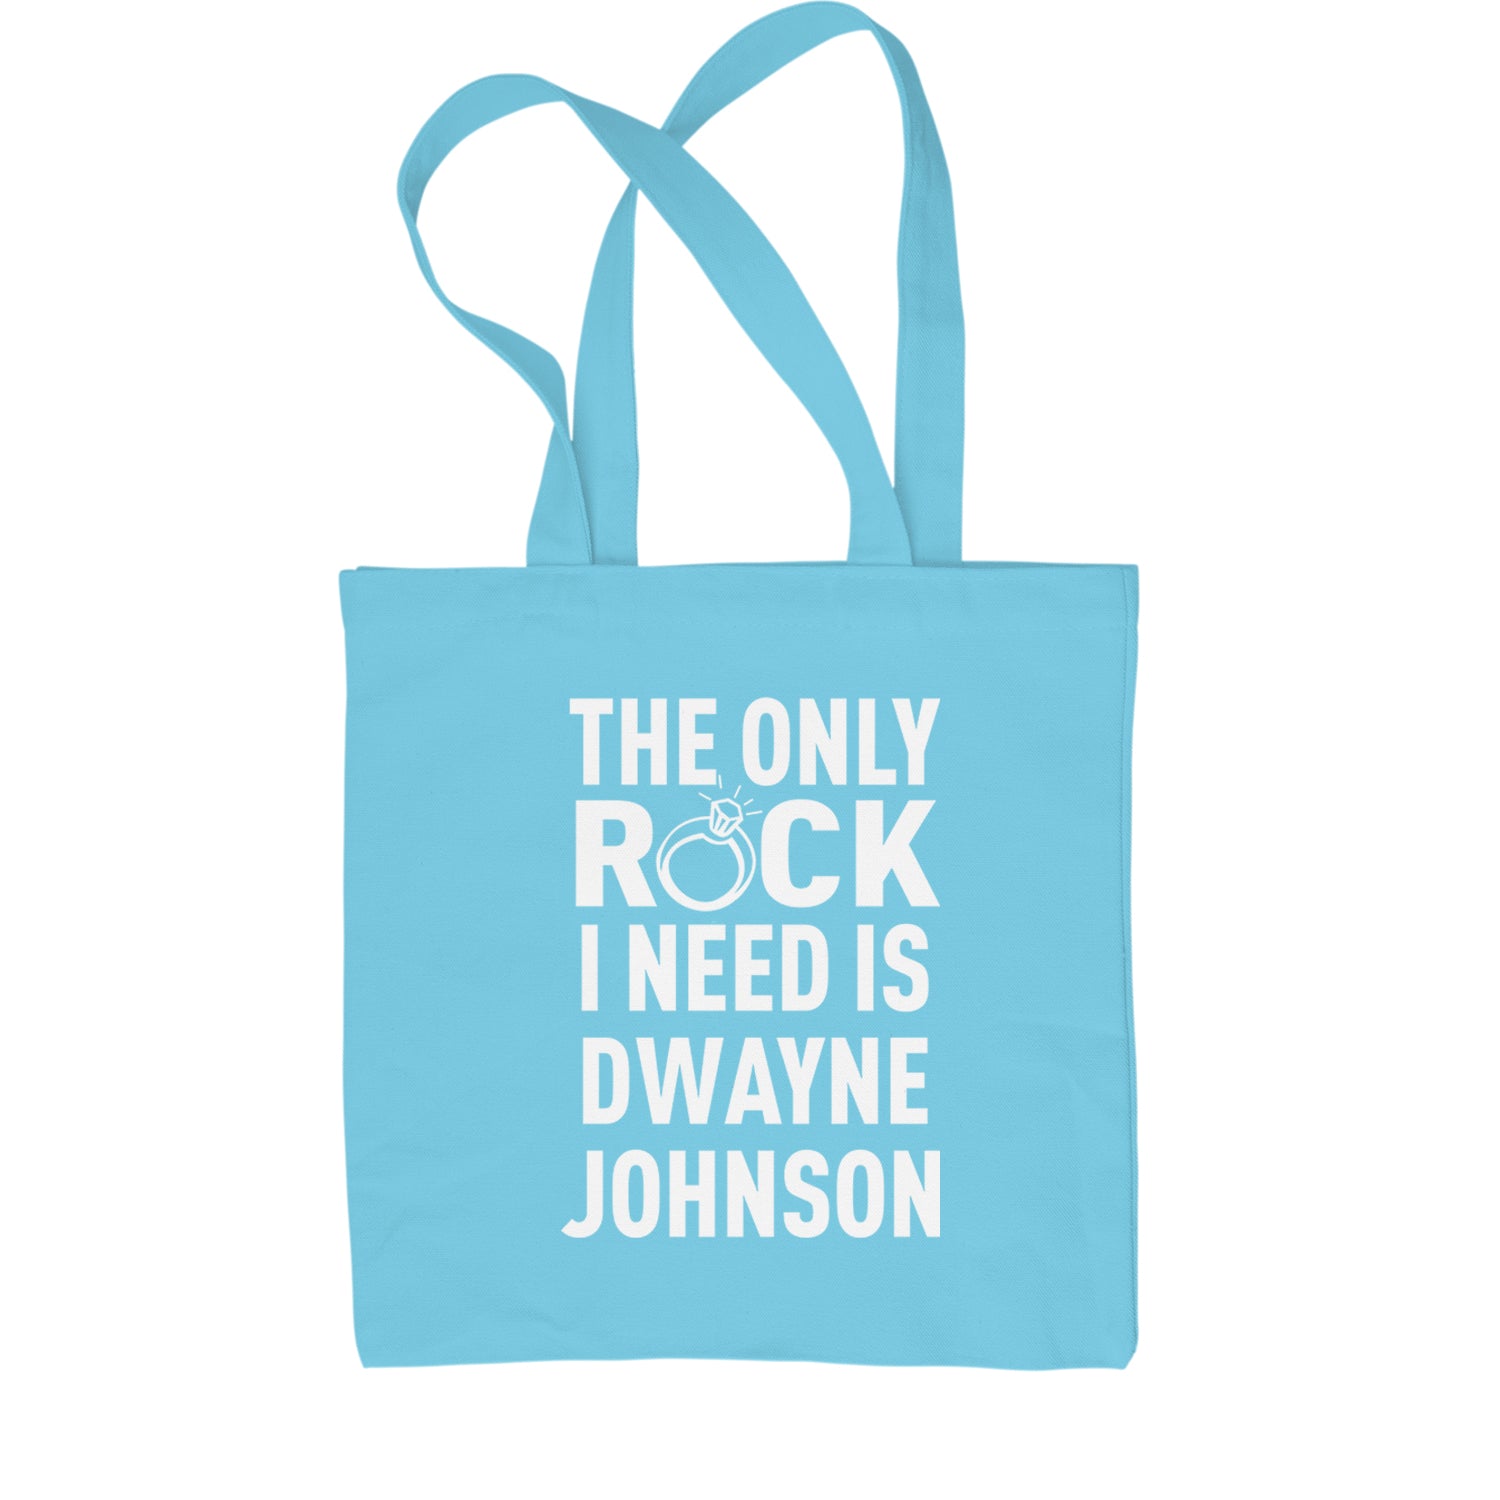 The Only Rock I Need Is Dwayne Johnson Shopping Tote Bag dwayne, johnson, marry, me, ring, rock, the, wedding by Expression Tees